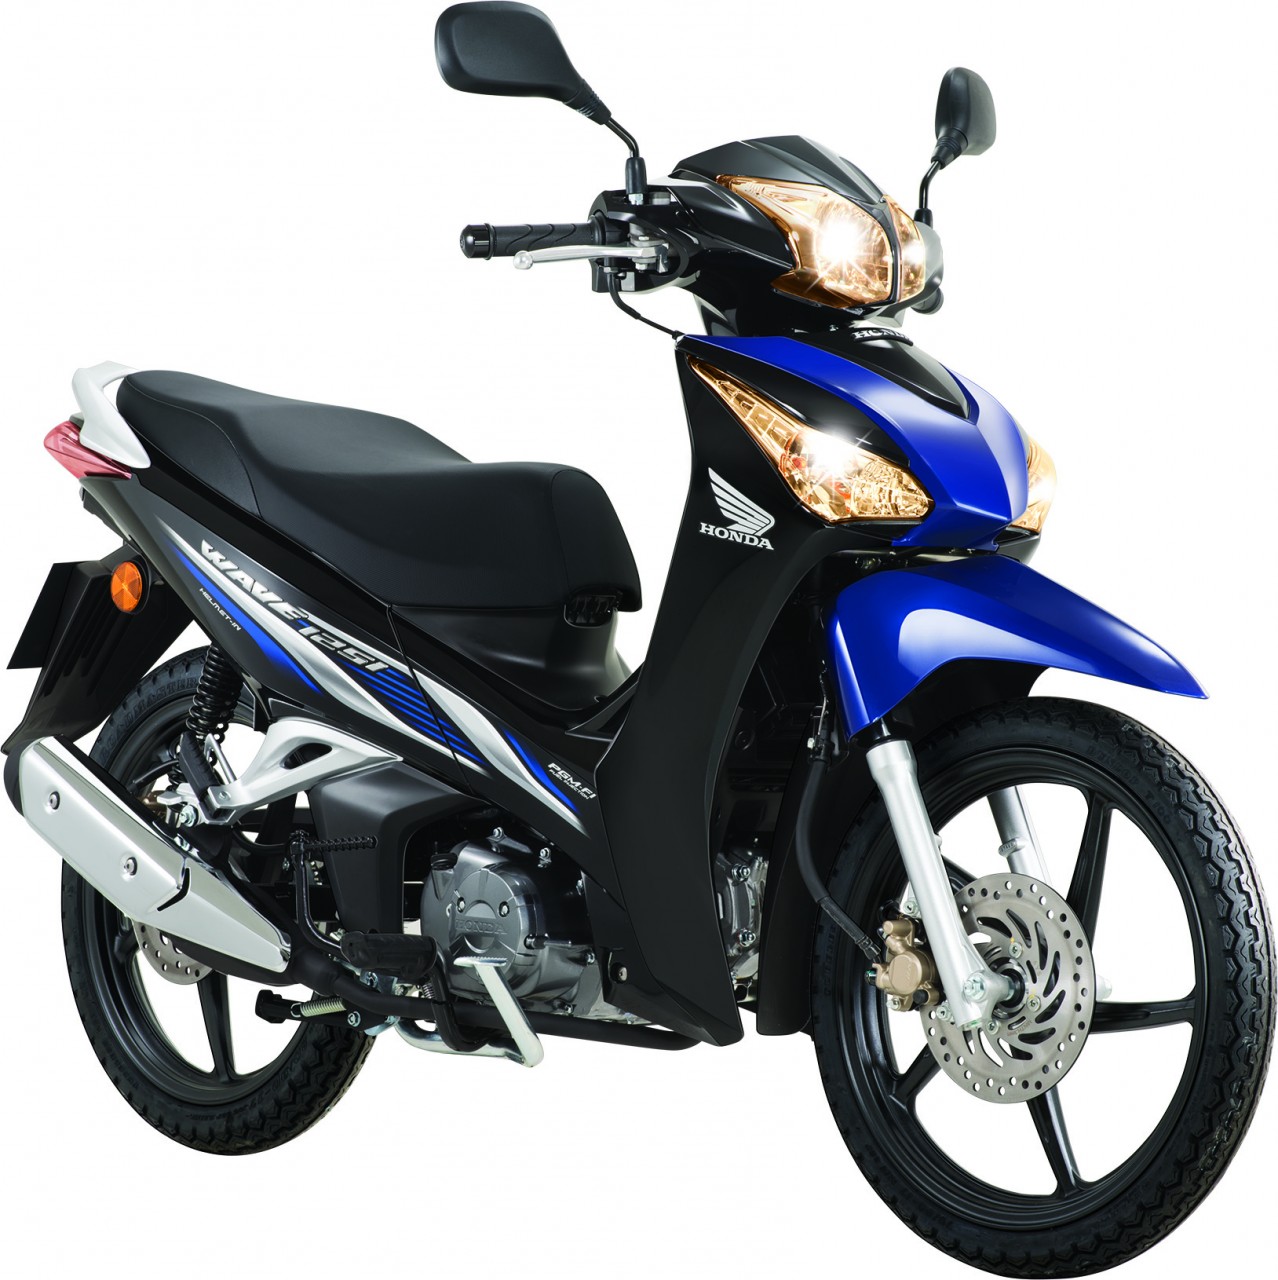 BIKES: Honda Wave 125i Launched in Malaysia, From RM6,263 - Autofreaks.com